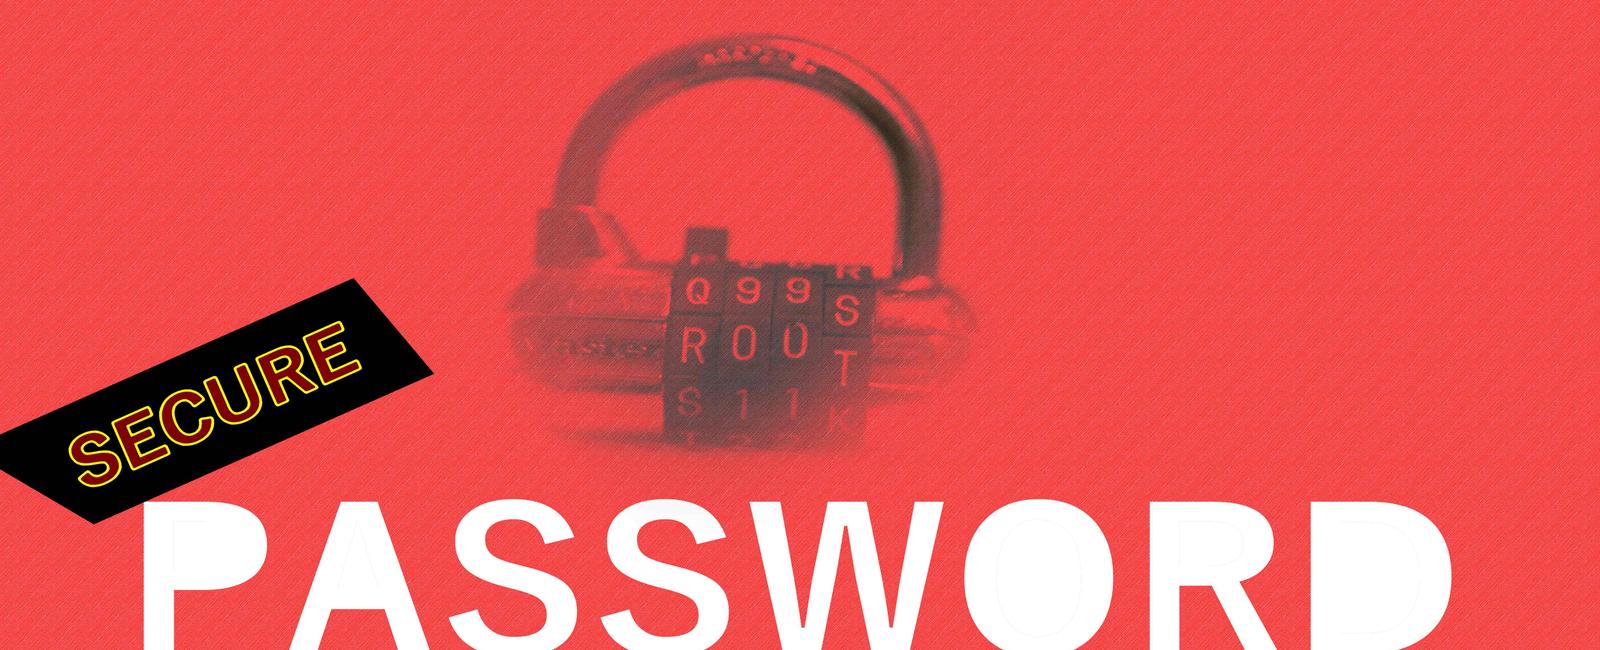 Of the world s 2 2 billion unique passwords used at any given time 7 of them contain a curse word the most popular is ass with 27 million usages and sex at 5 million